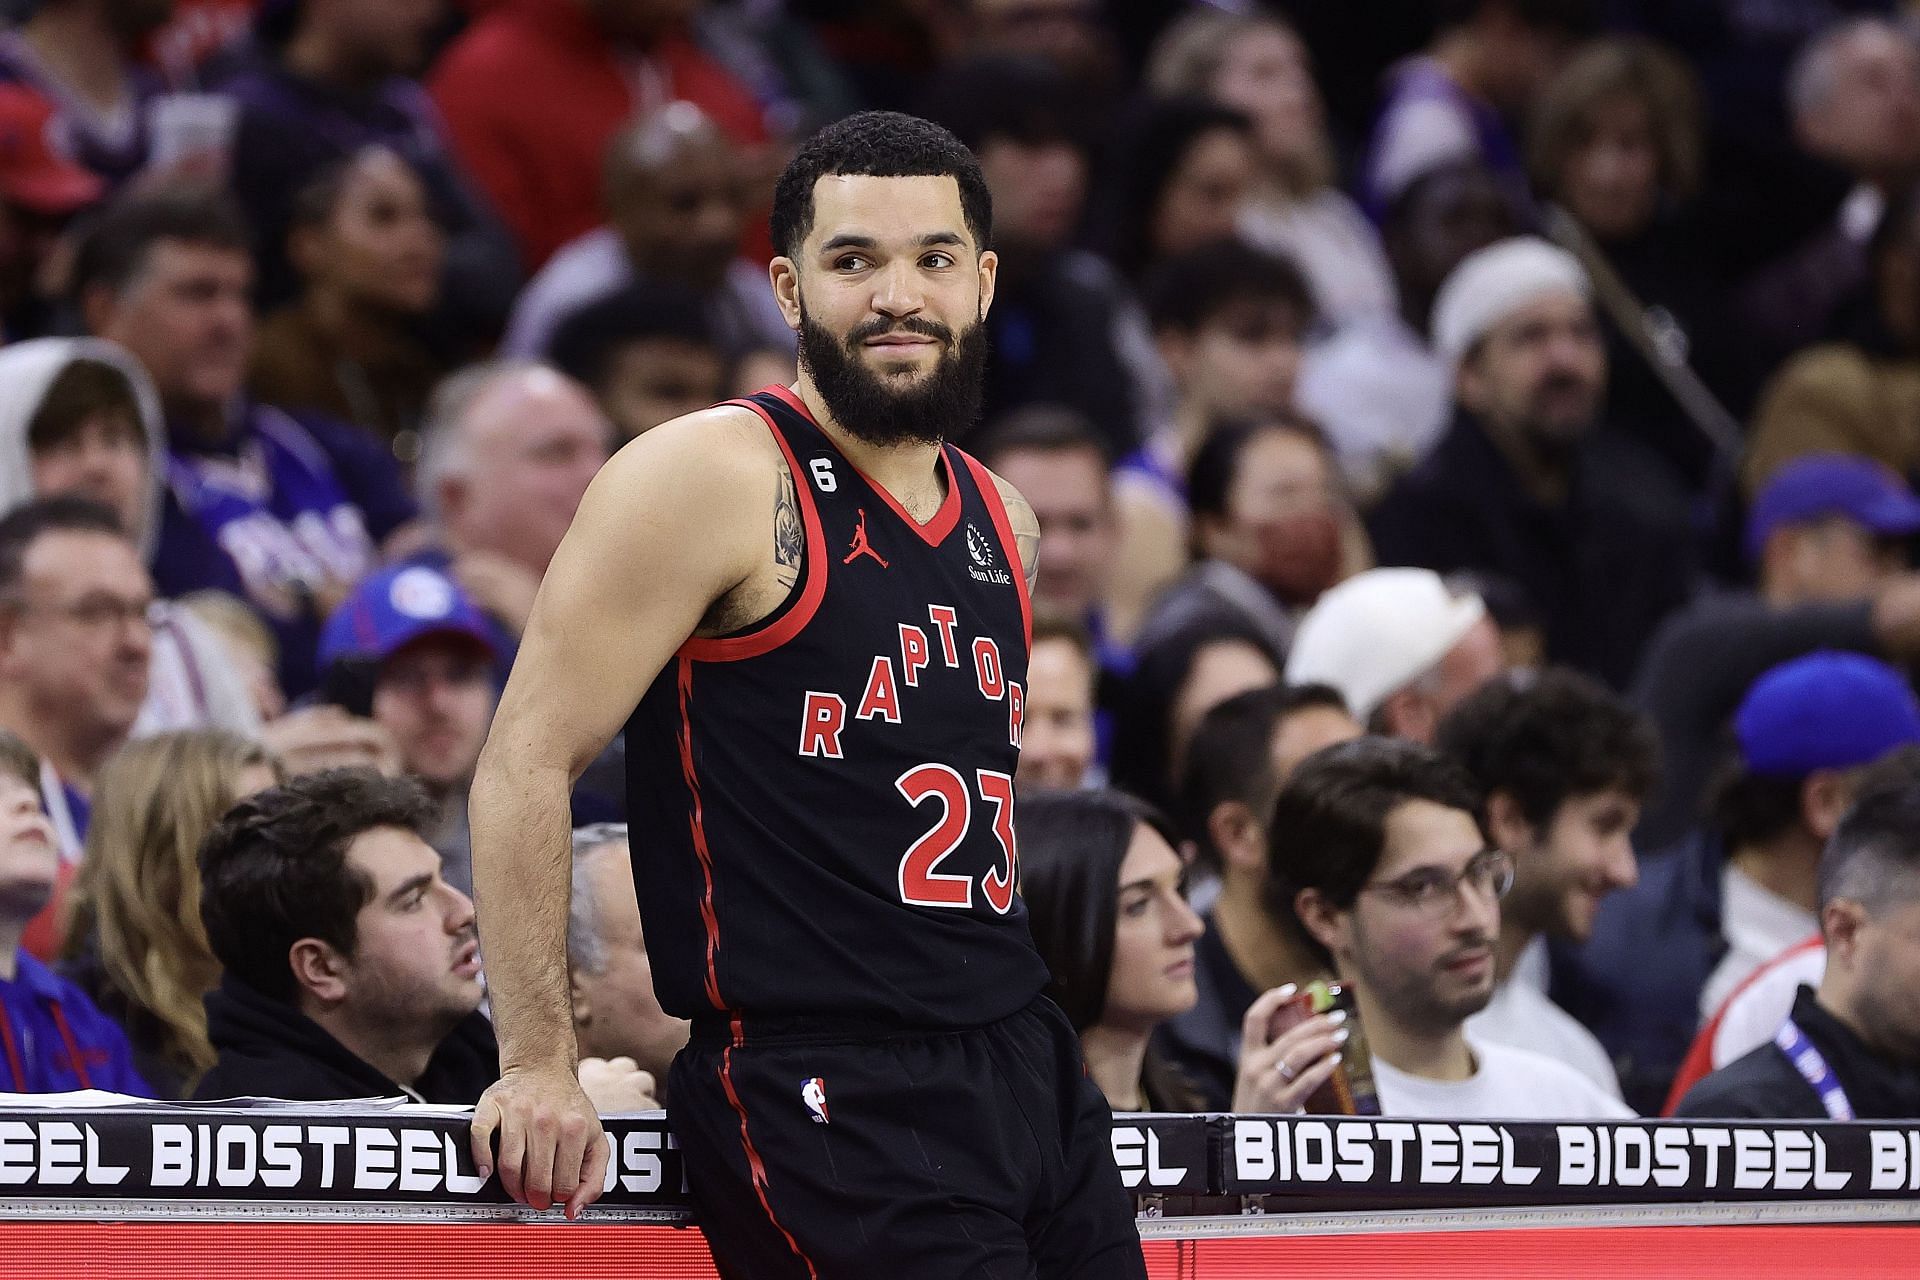 Fred VanVleet has been rumored for a potential LA Lakers trade